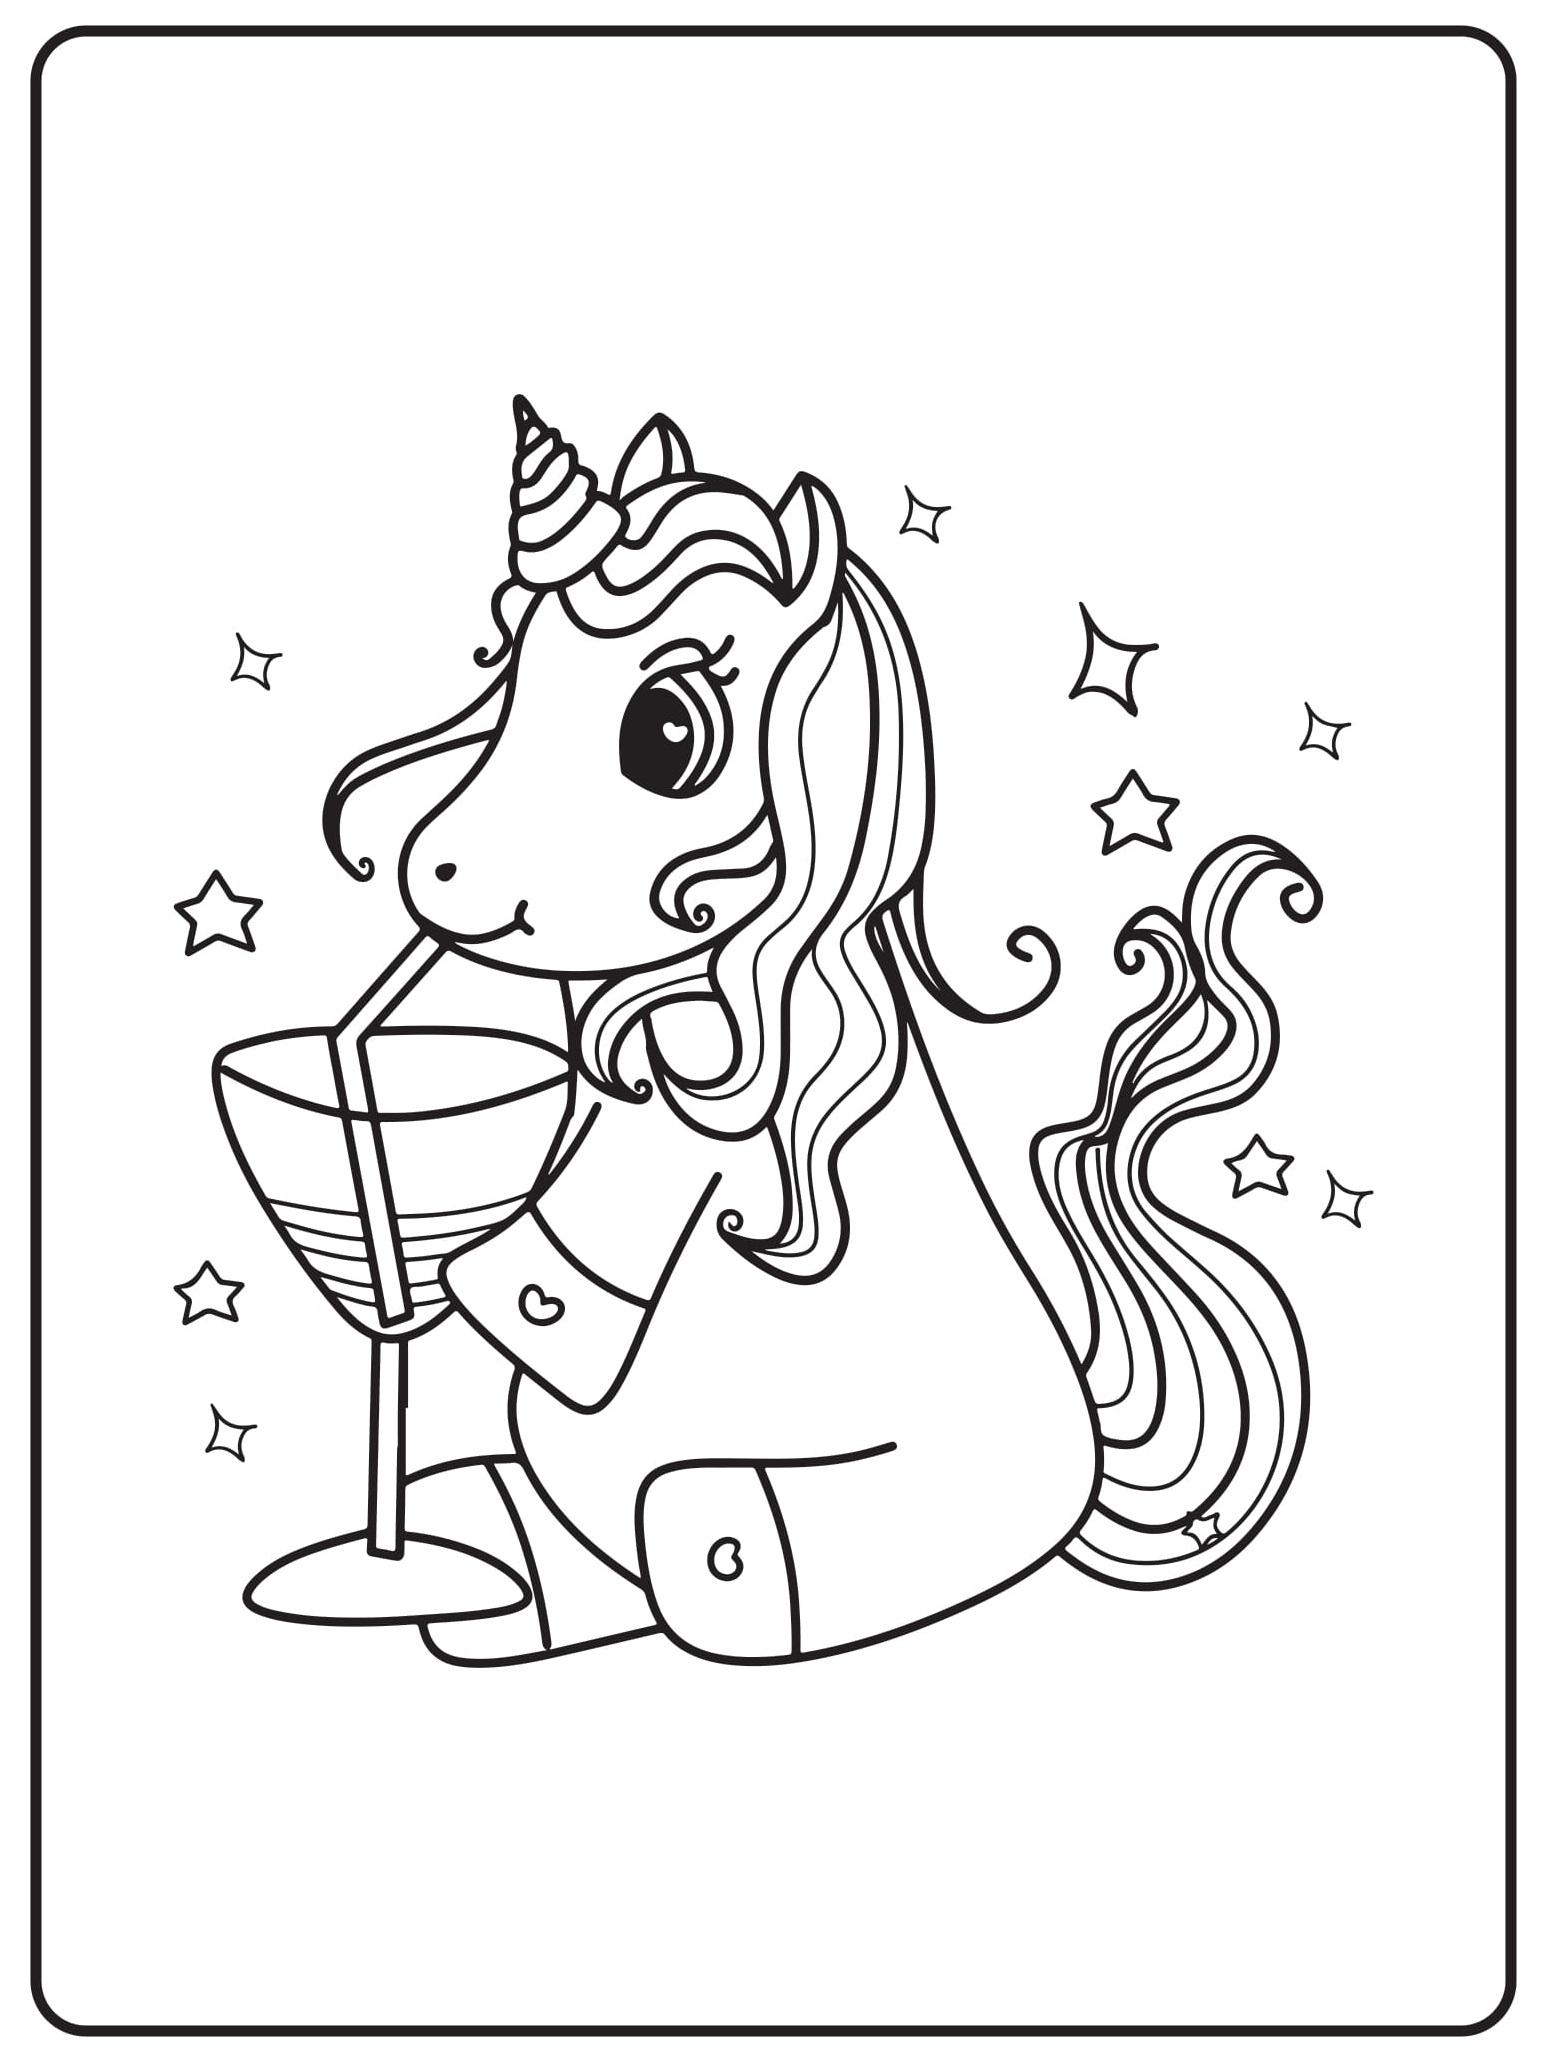 Unicorn Coloring Pages 07